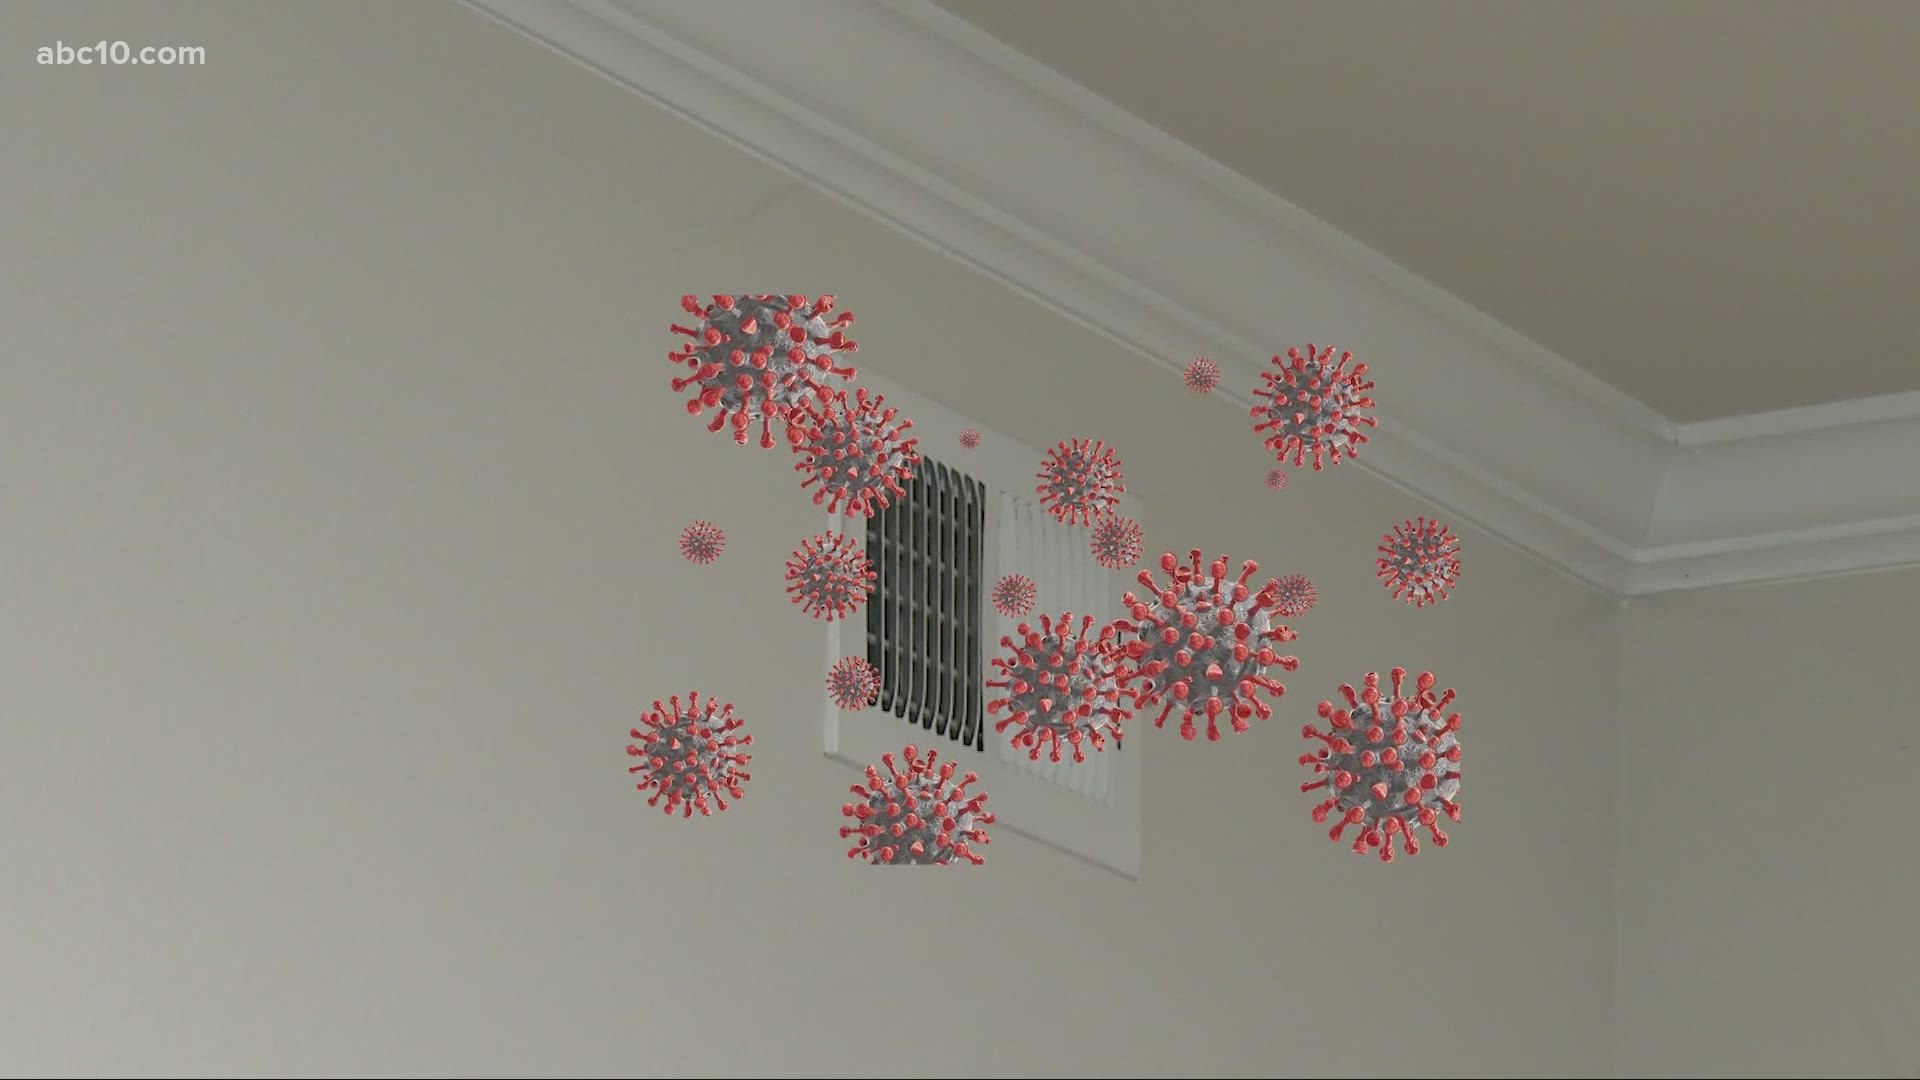 As the summer months roll in many are turning on their A/C, but can you catch the coronavirus in a apartment where vents are shared?